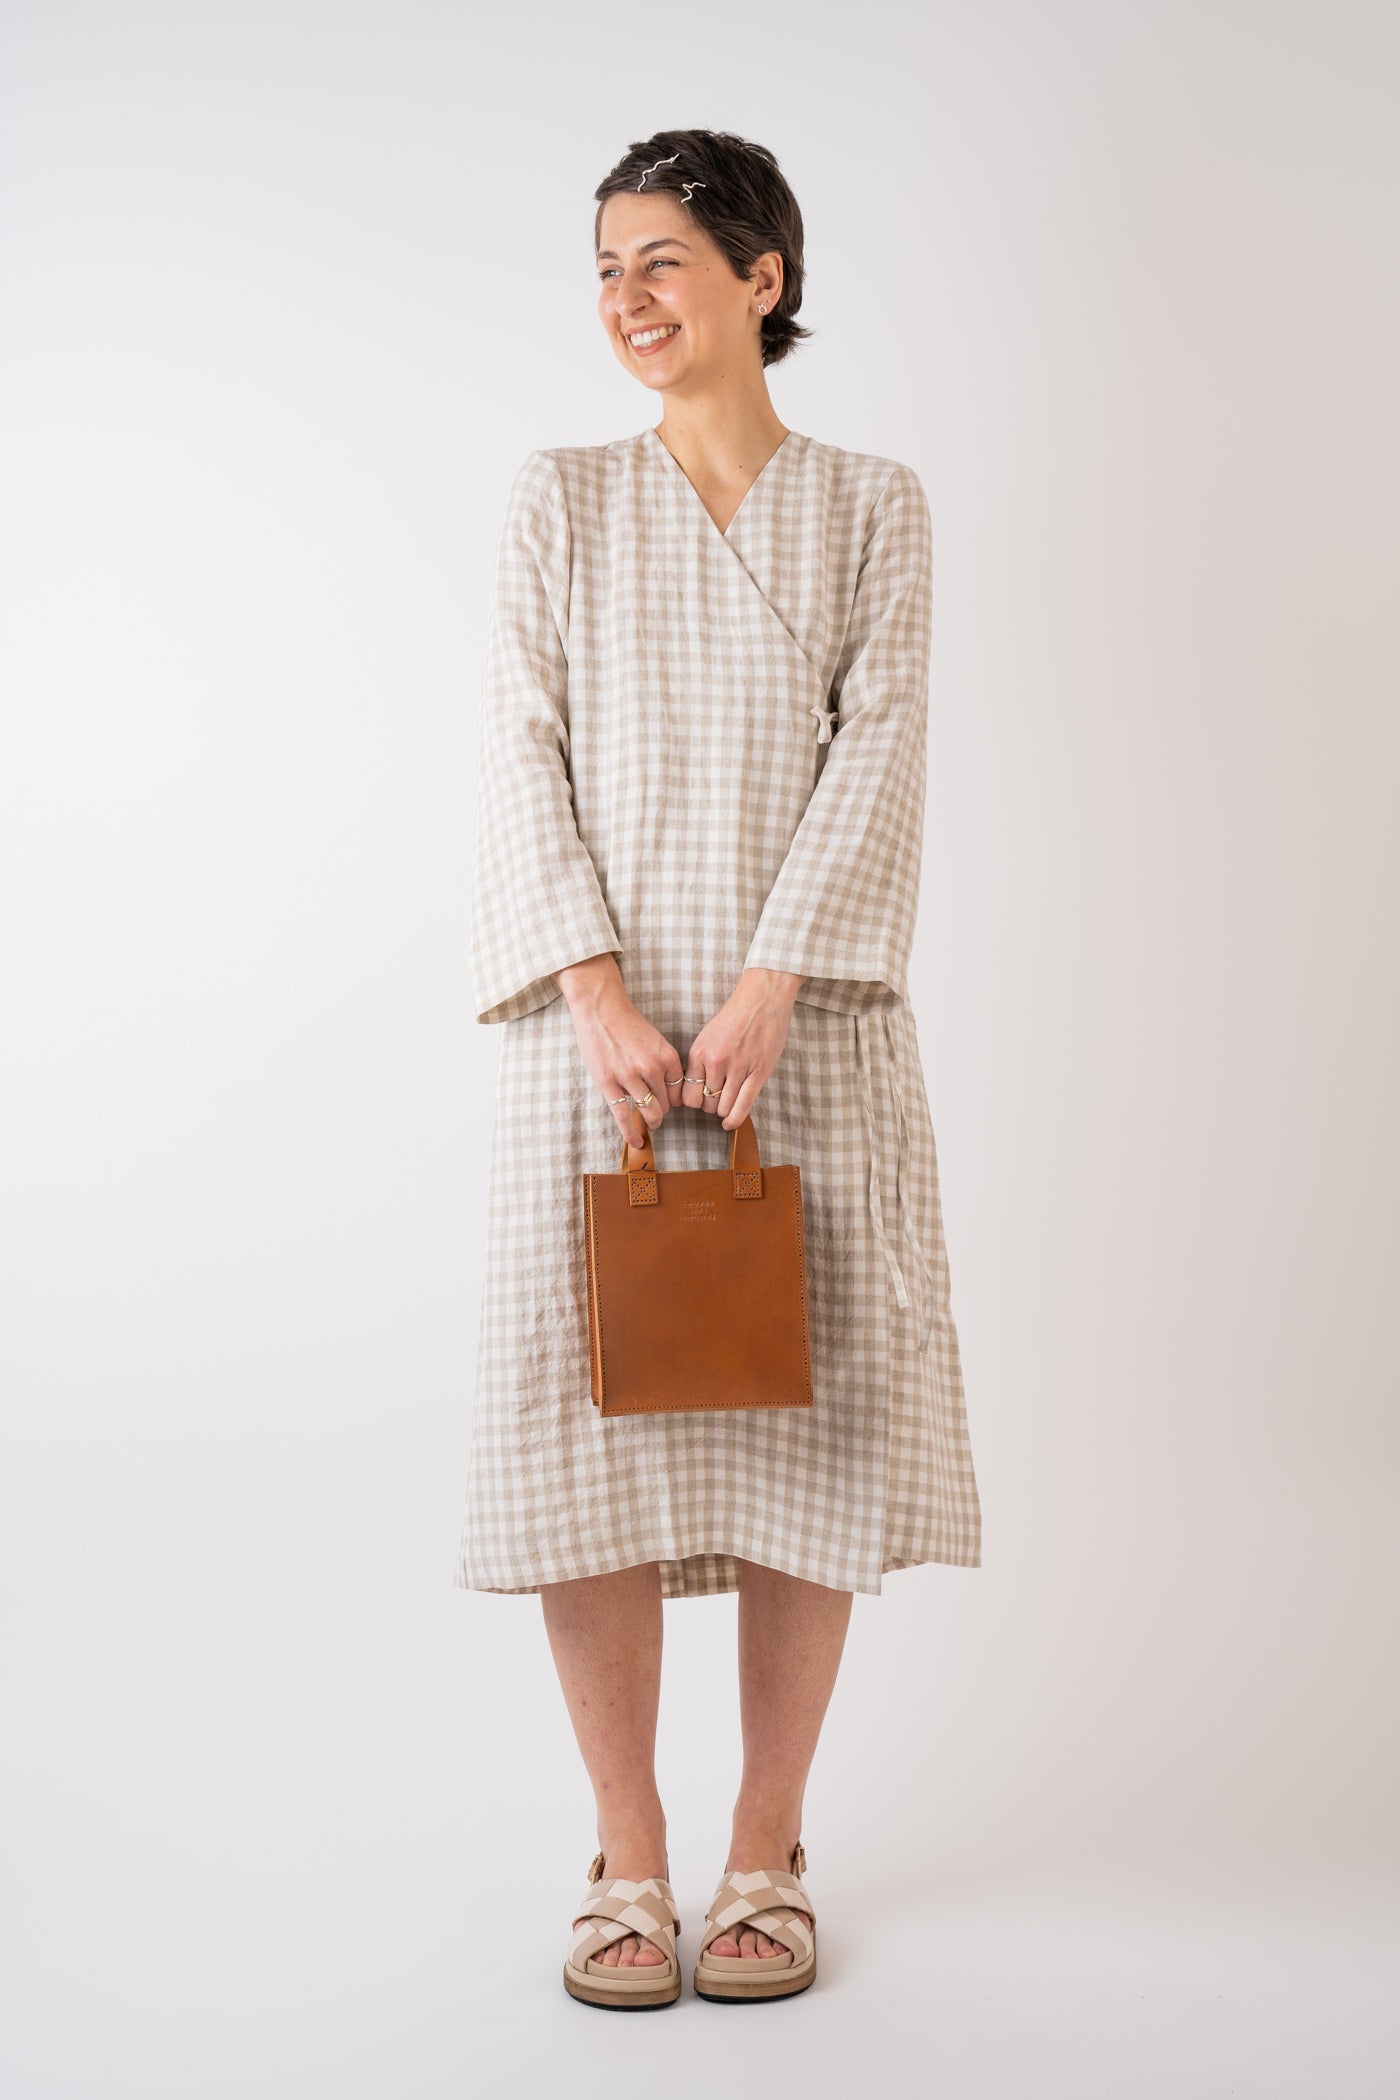 Cawley Studio 100% Irish Stripe  Linen Marina Dress in Gingham handmade in London MIMMO Exclusive styled with Couper et Coudre Leather Jour Bag in Cognac handmade in Somerset